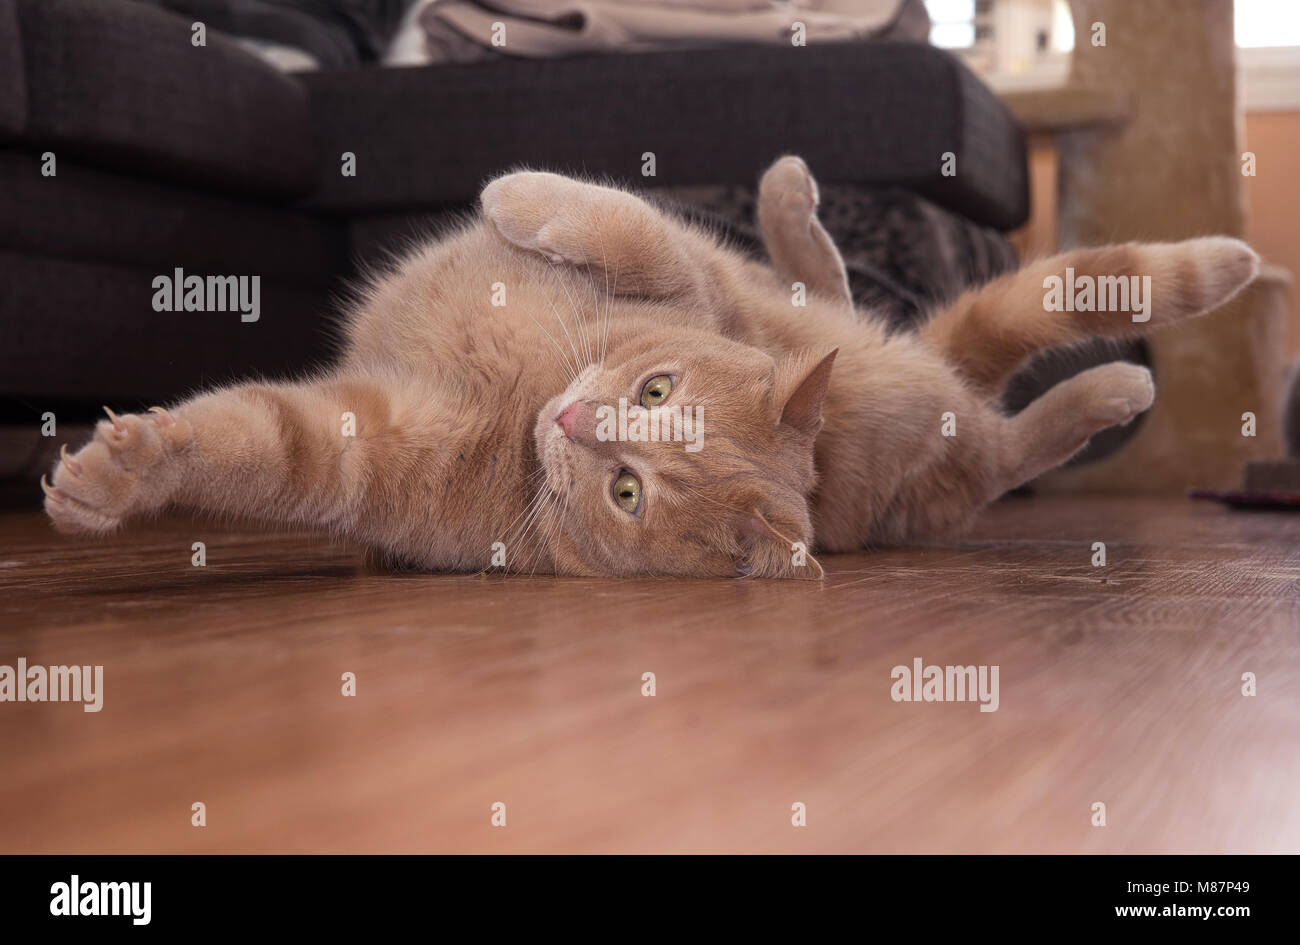 Montreal,Canada,15,March,2018. Close-up of a tabby cat stretching on floor.Credit:Mario Beauregard/Alamy Live News Stock Photo